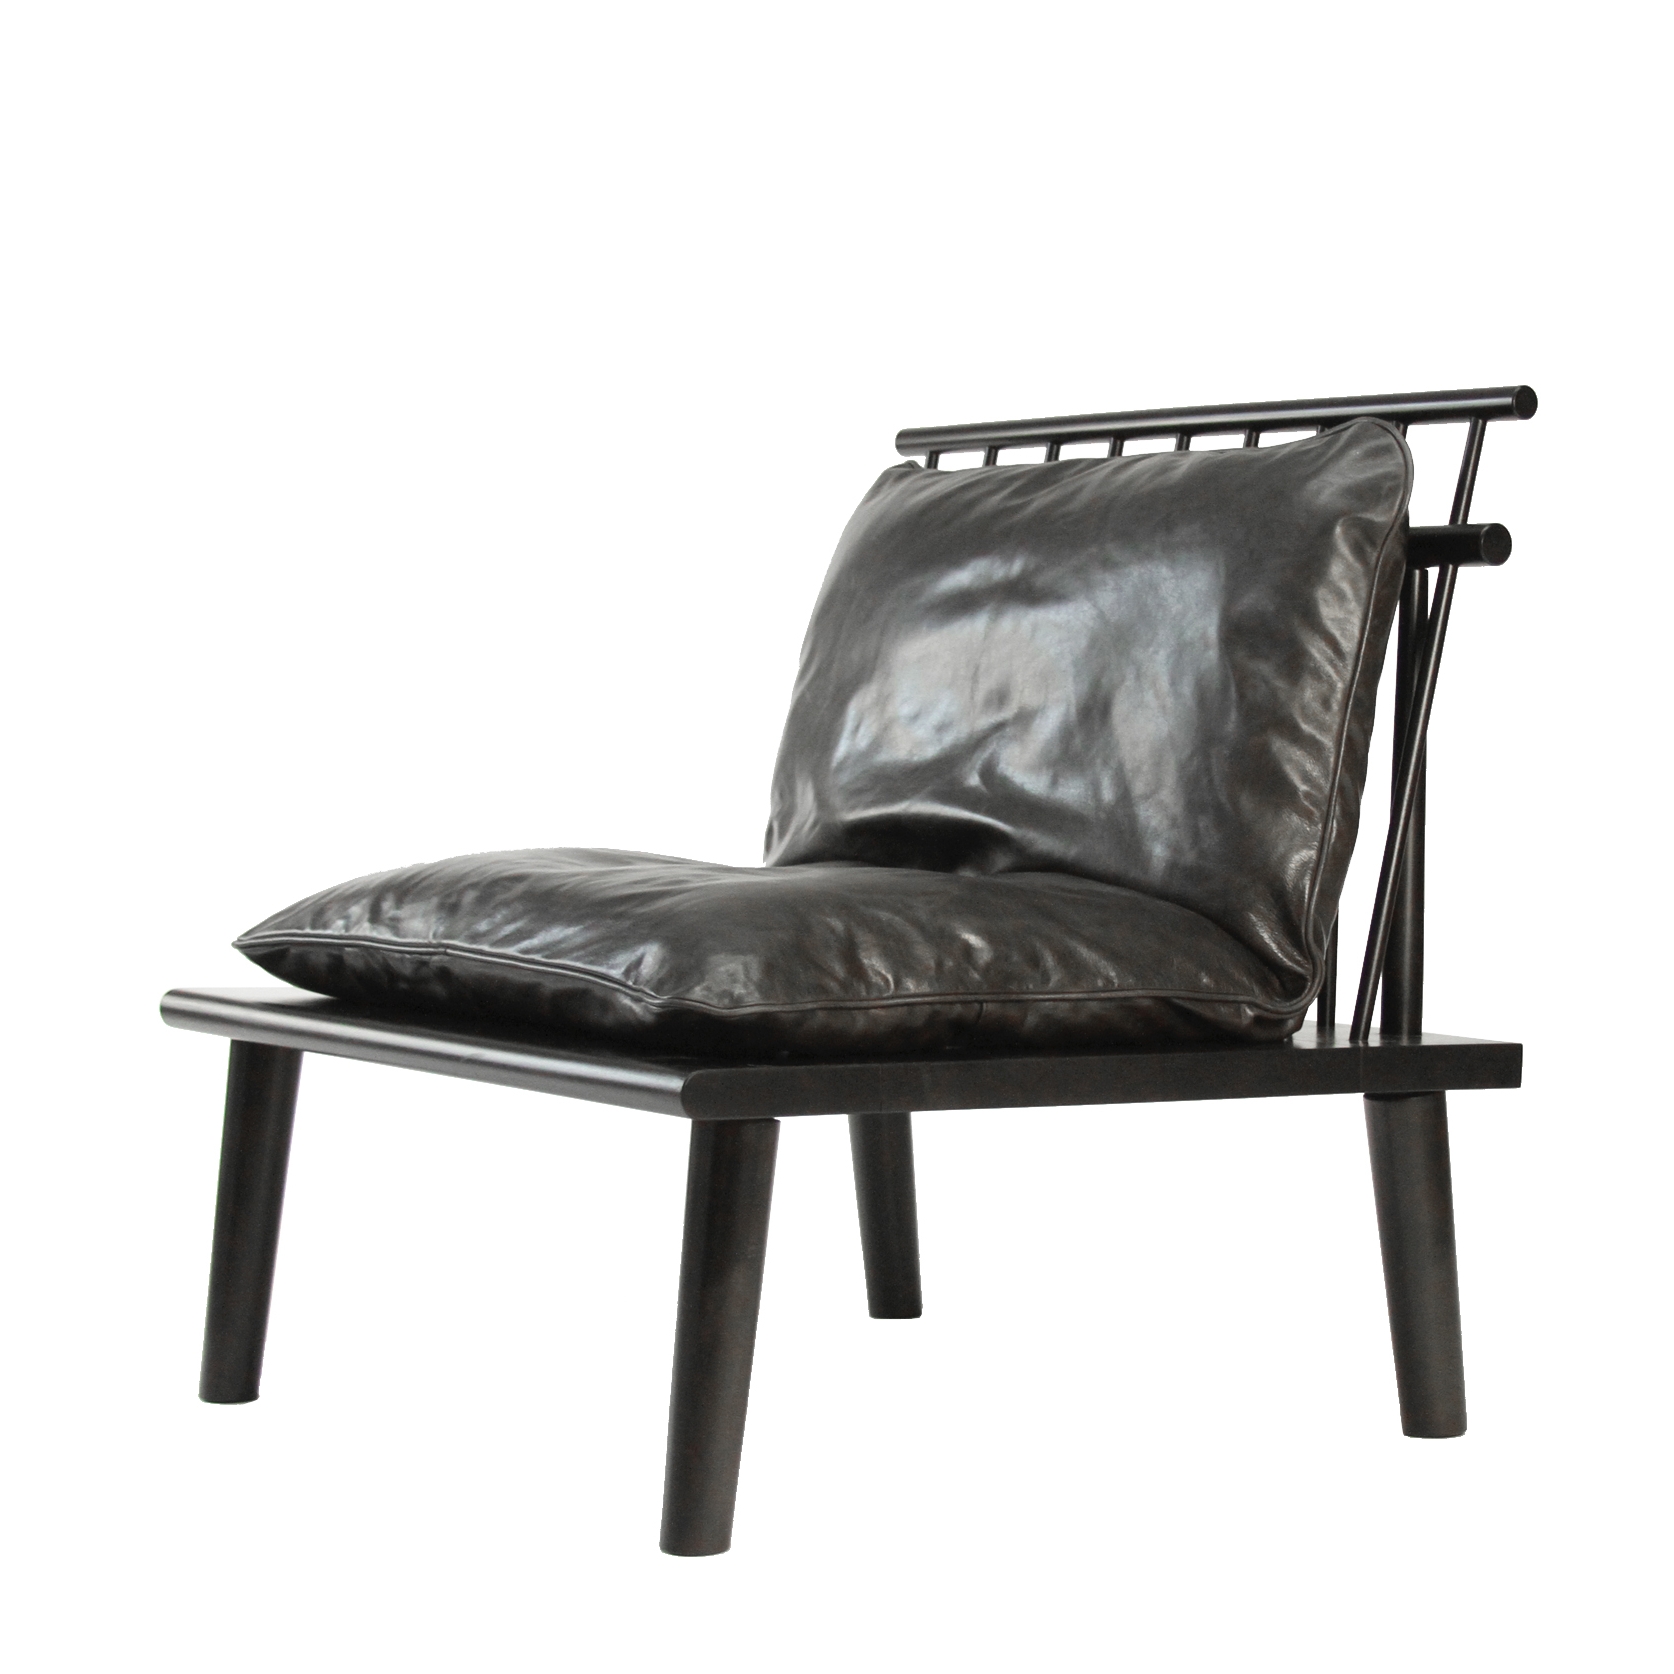 O&G Studio Matunuck Lounge Chair Windsor Contemporary Leather Down Feather Cushion Pad Soft Seating Webbing Mid Century Modern Andrew Mau Designed American Design Interior Braced Seating Ebonized Maple Black Stained Stain